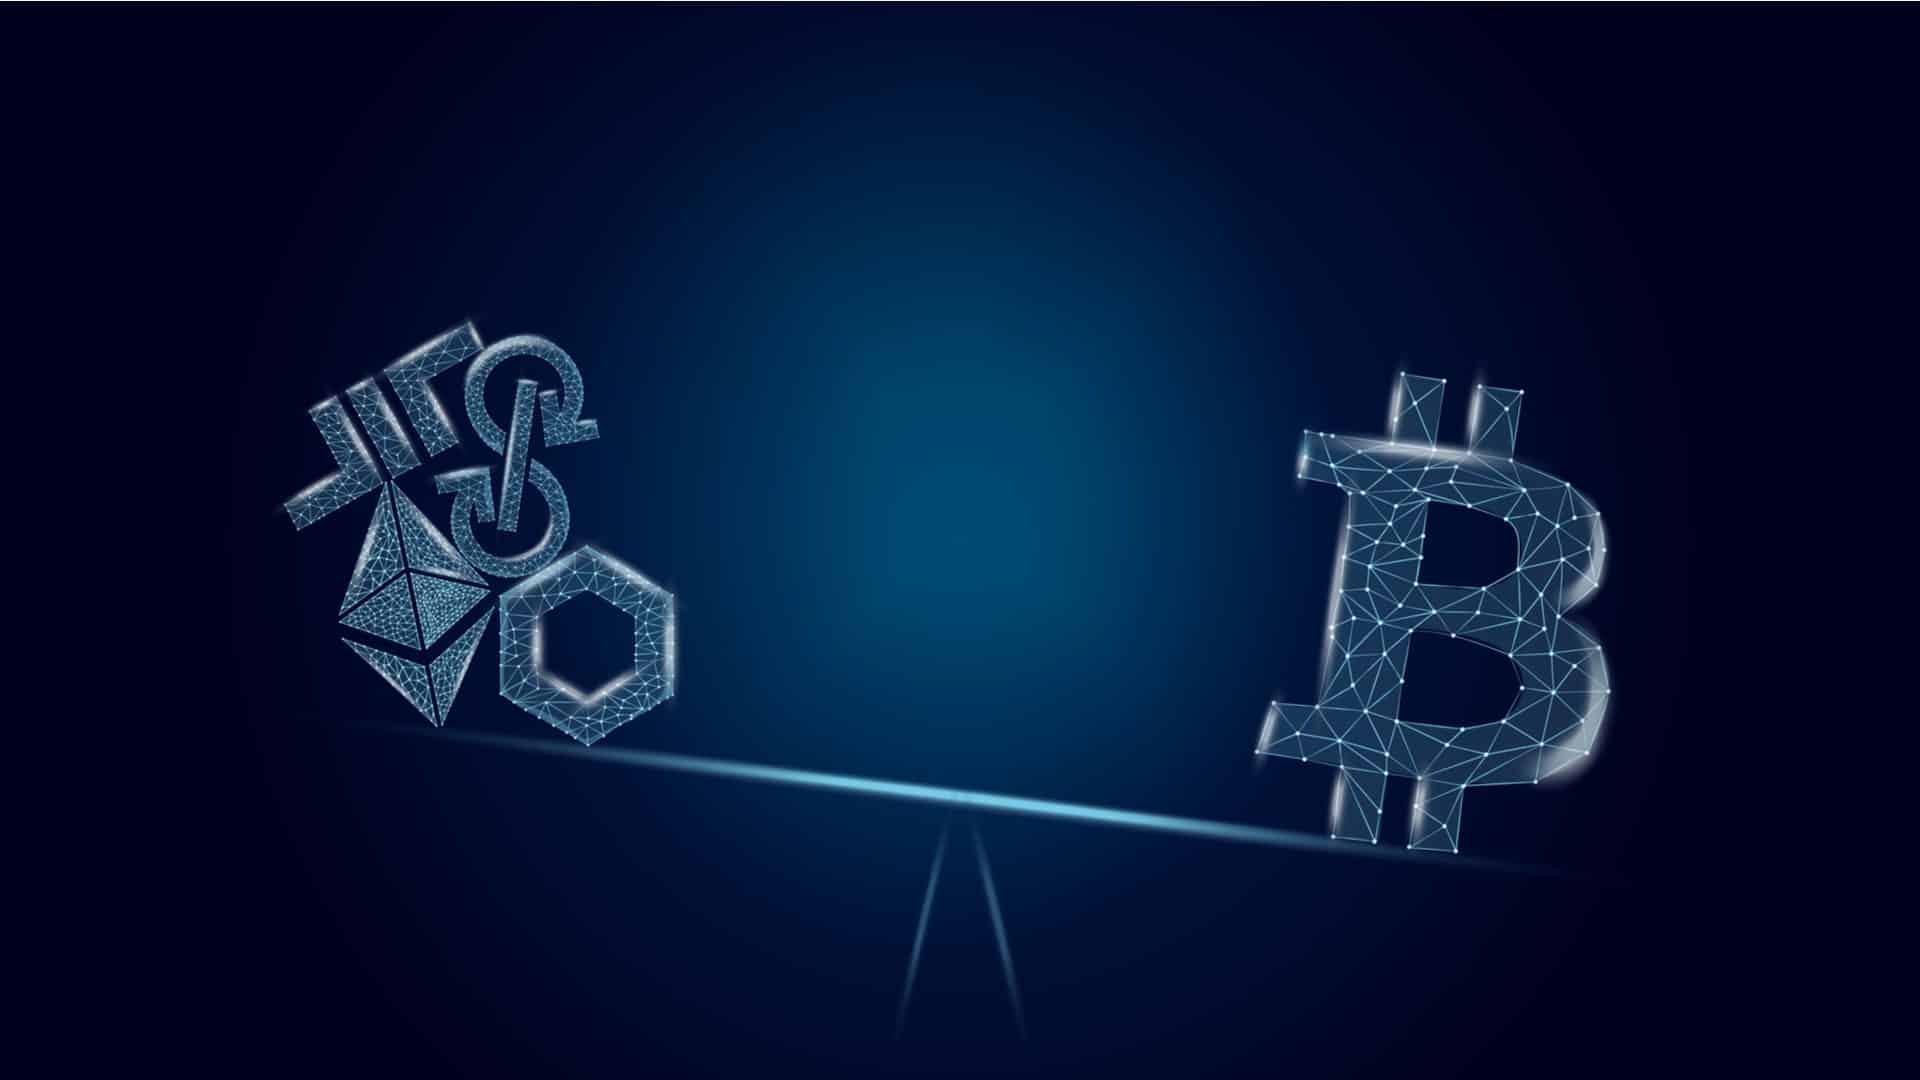 Will altcoins have a higher return than BTC in the future?